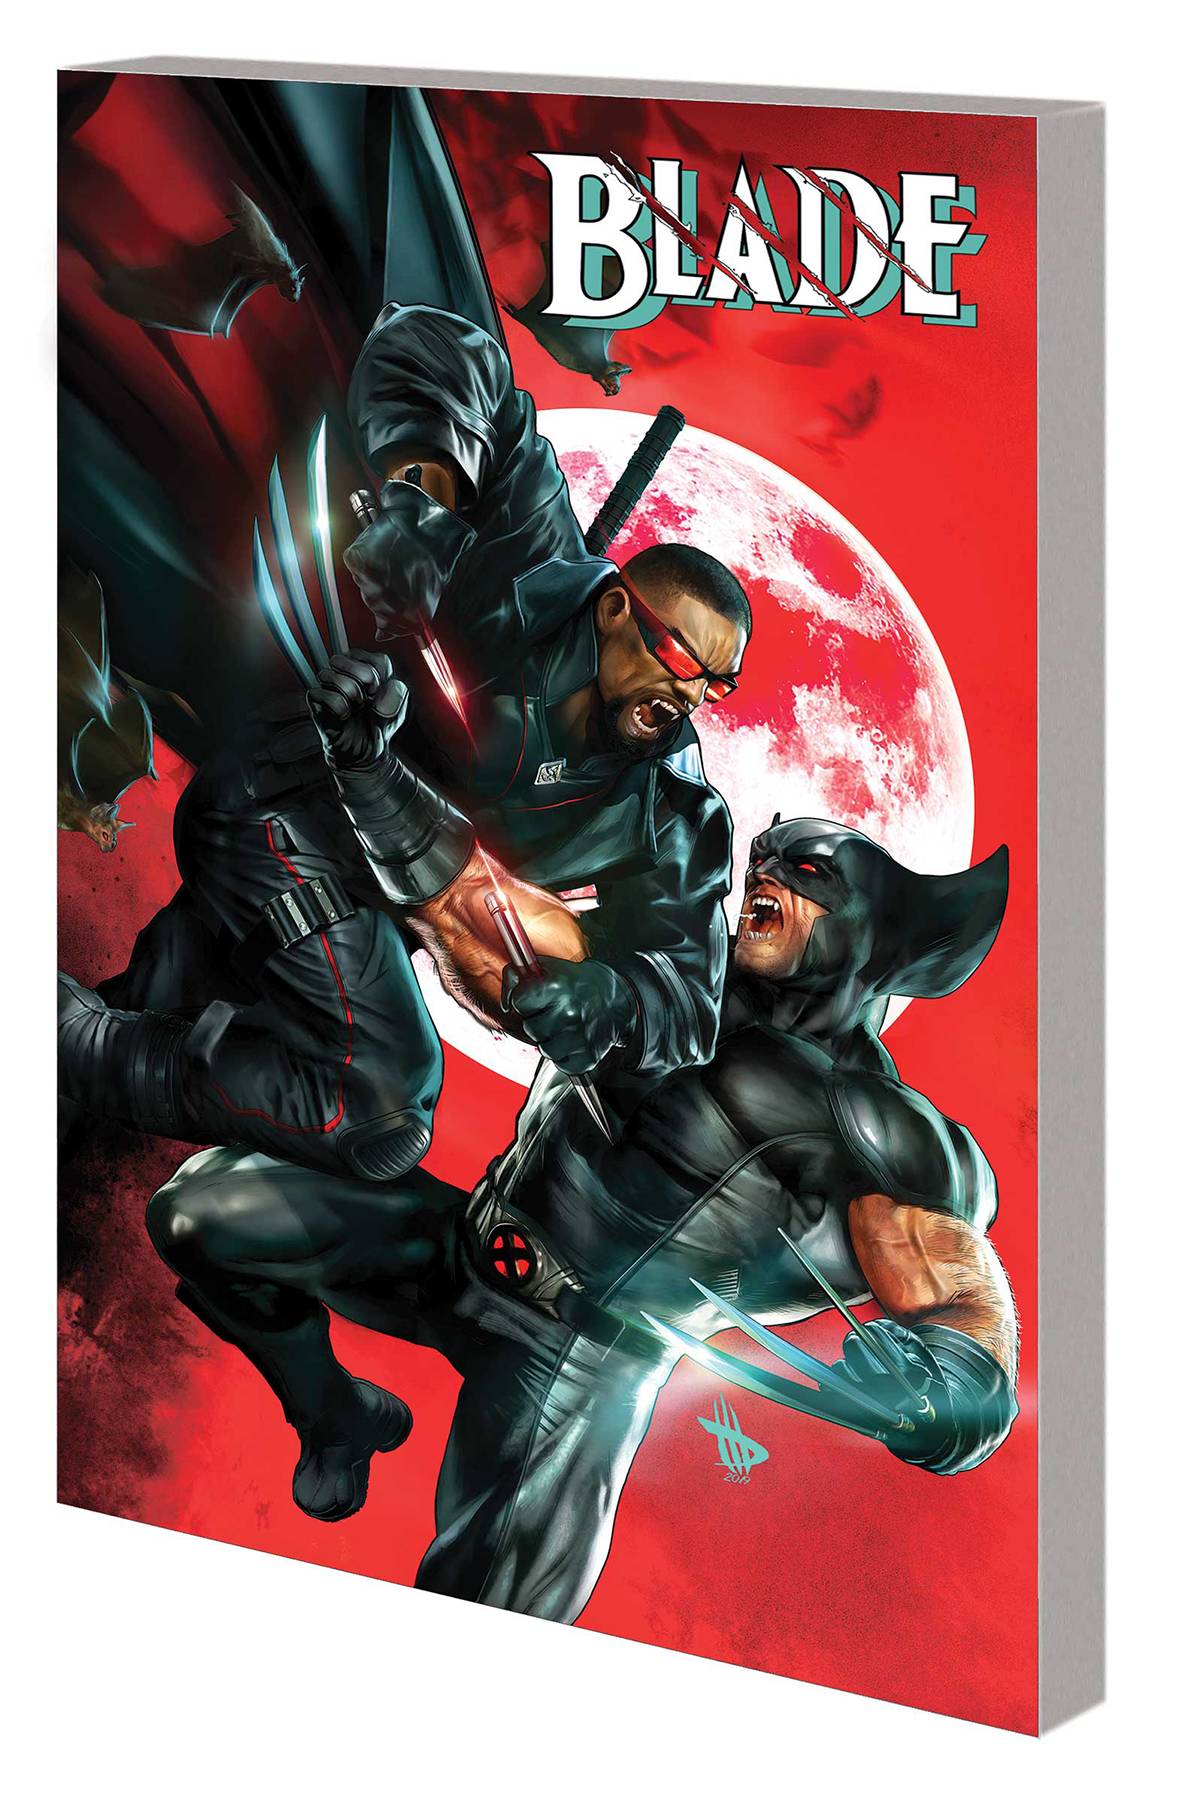 Blade by Guggenheim Complete Collection Graphic Novel